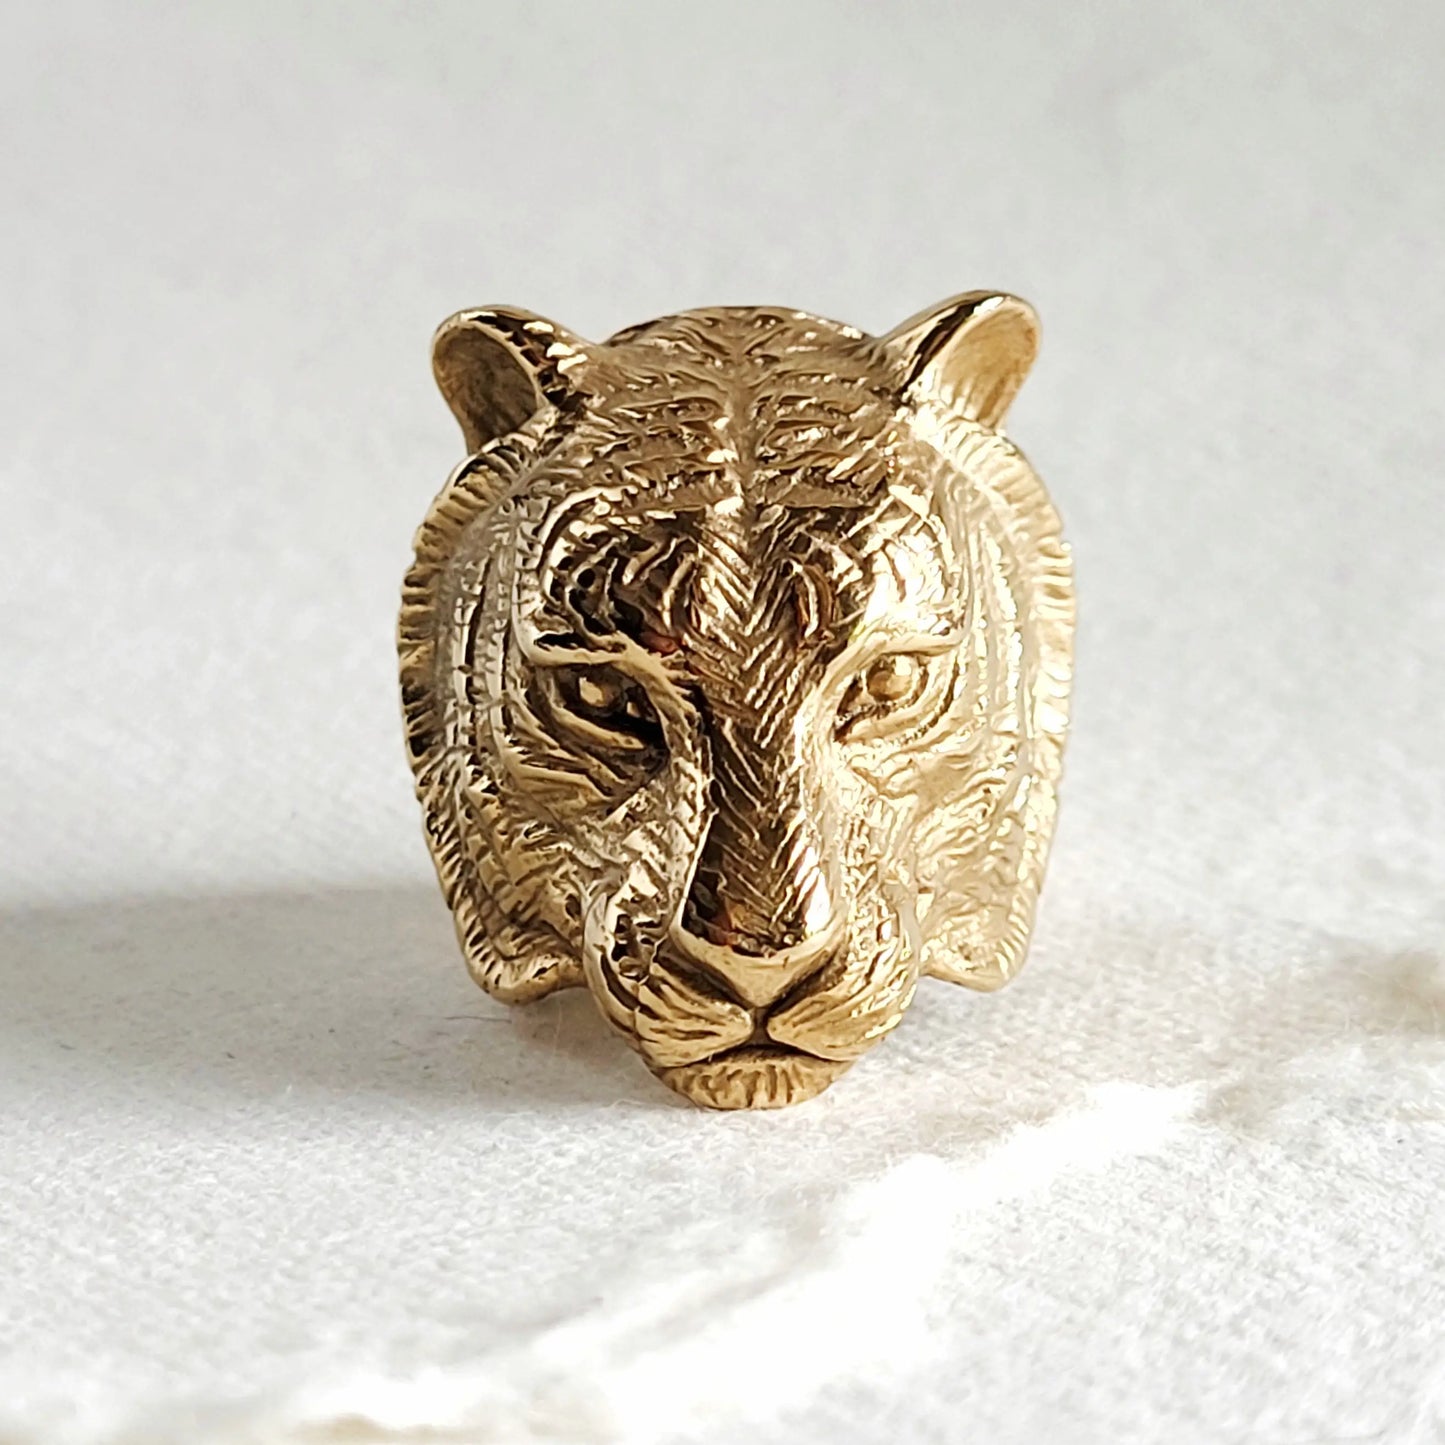 Tiger Lion Animal Ring 18 kt Gold Plated Size 9 - Moon Room Shop and Wellness